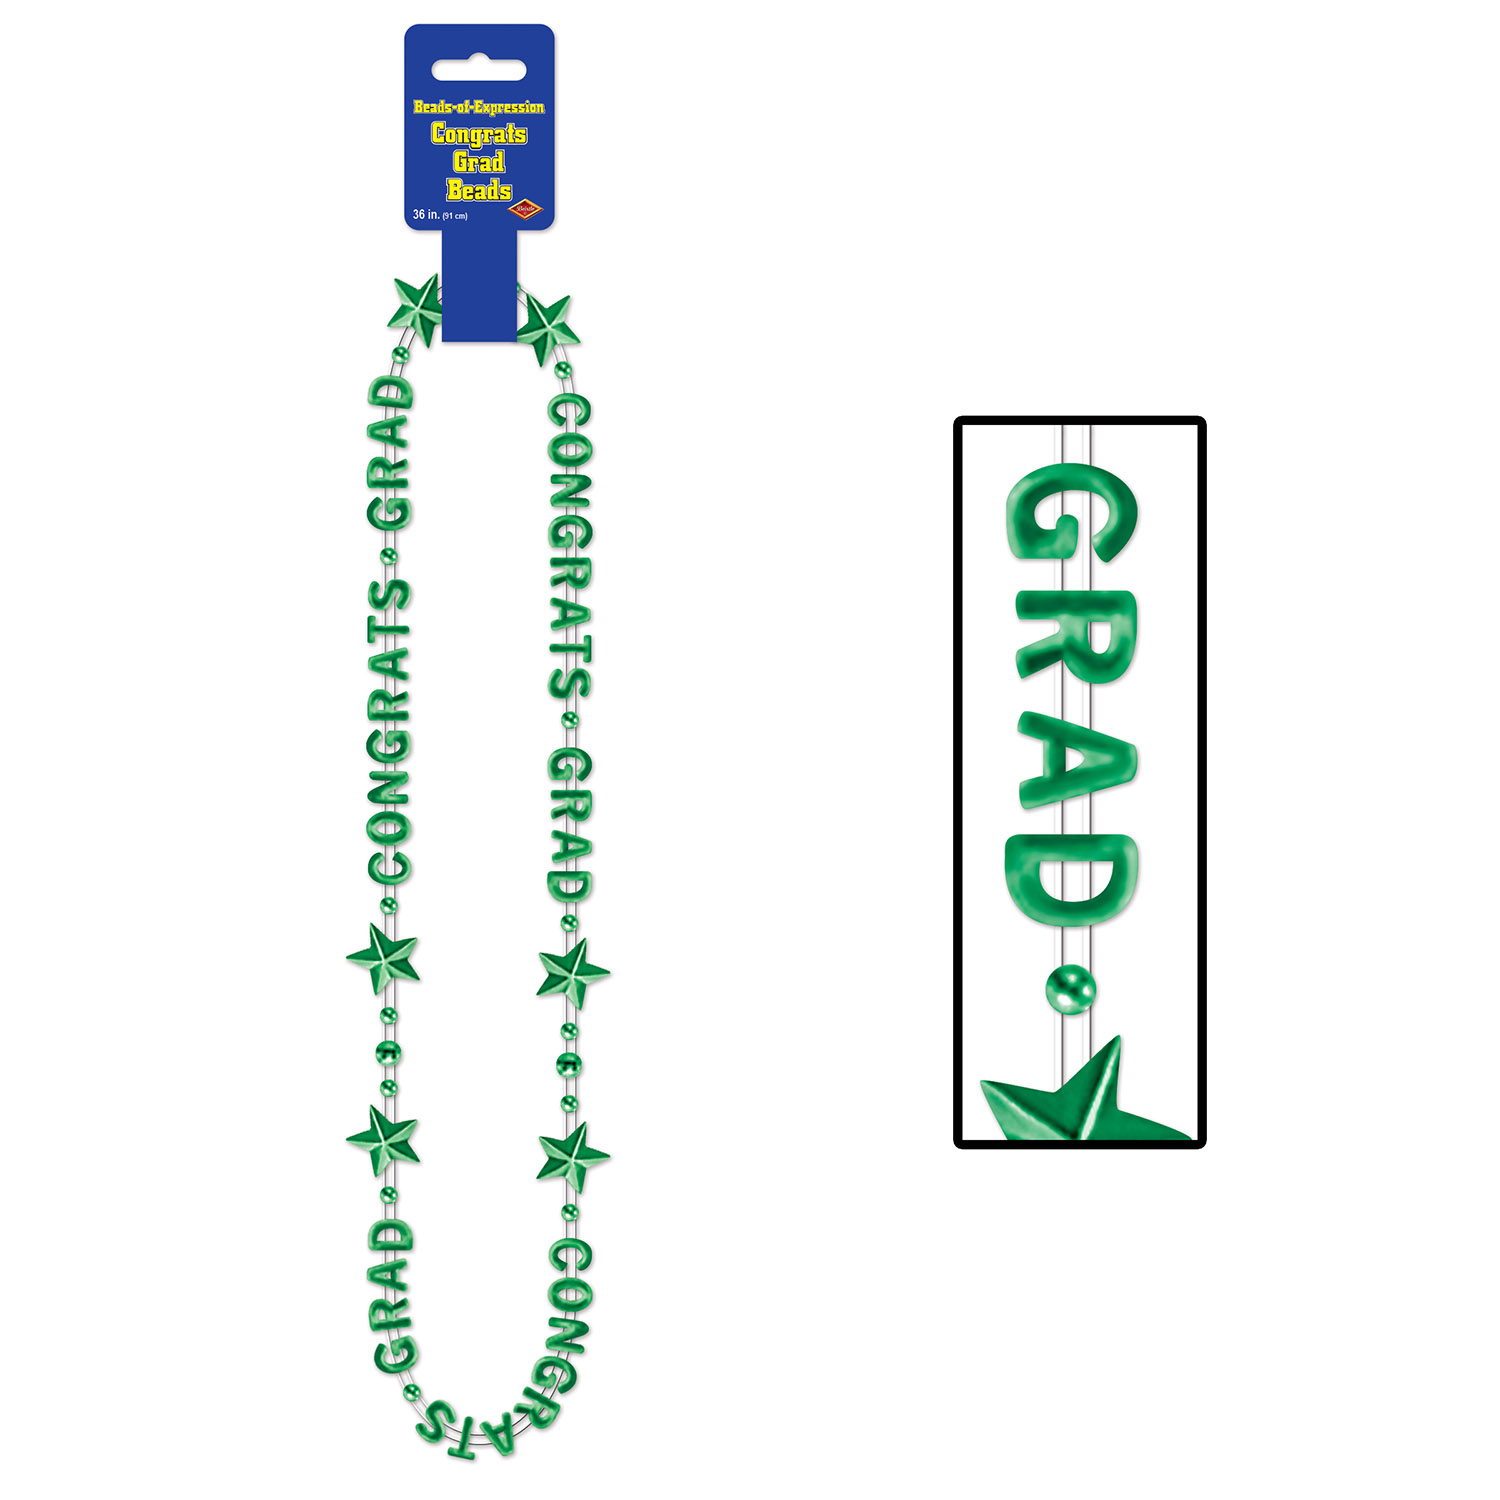 Congrats Grad BEADS-Of-Expression